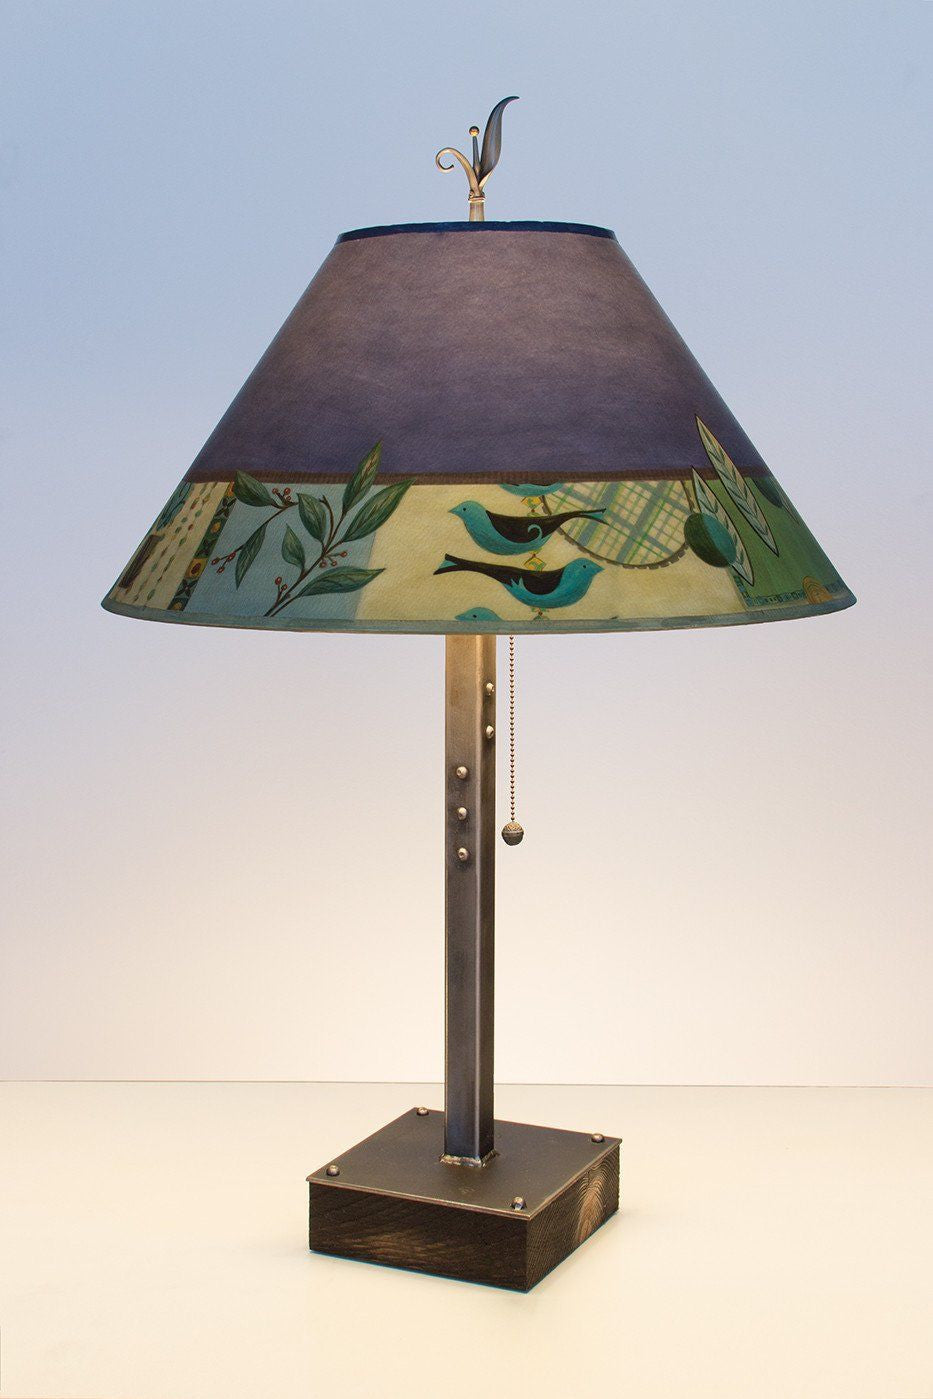 Janna Ugone &amp; Co Table Lamps Steel Table Lamp on Wood with Large Conical Shade in New Capri Periwinkle